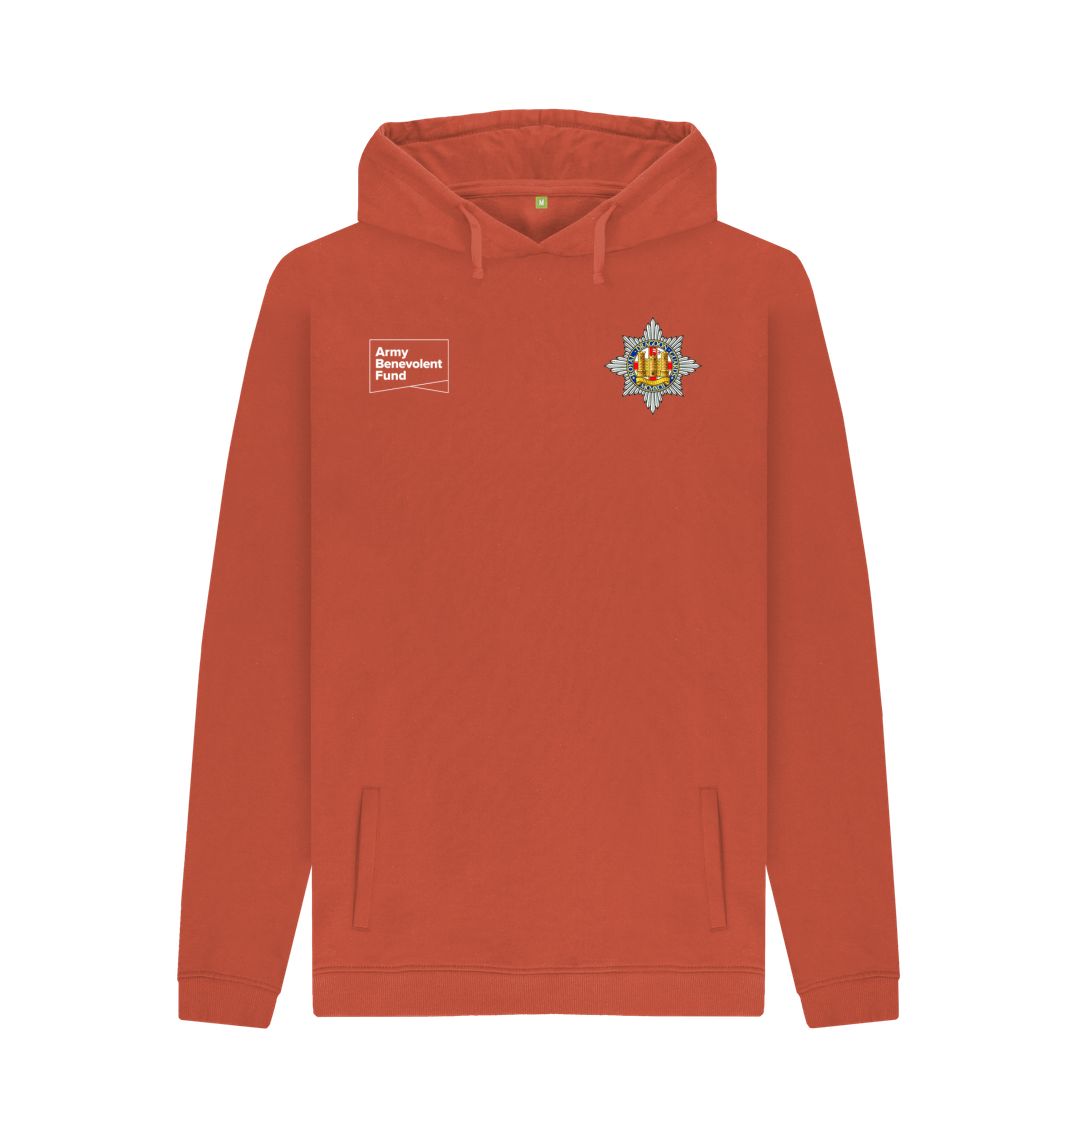 The Royal Dragoon Guards Unisex Hoodie - Army Benevolent Fund